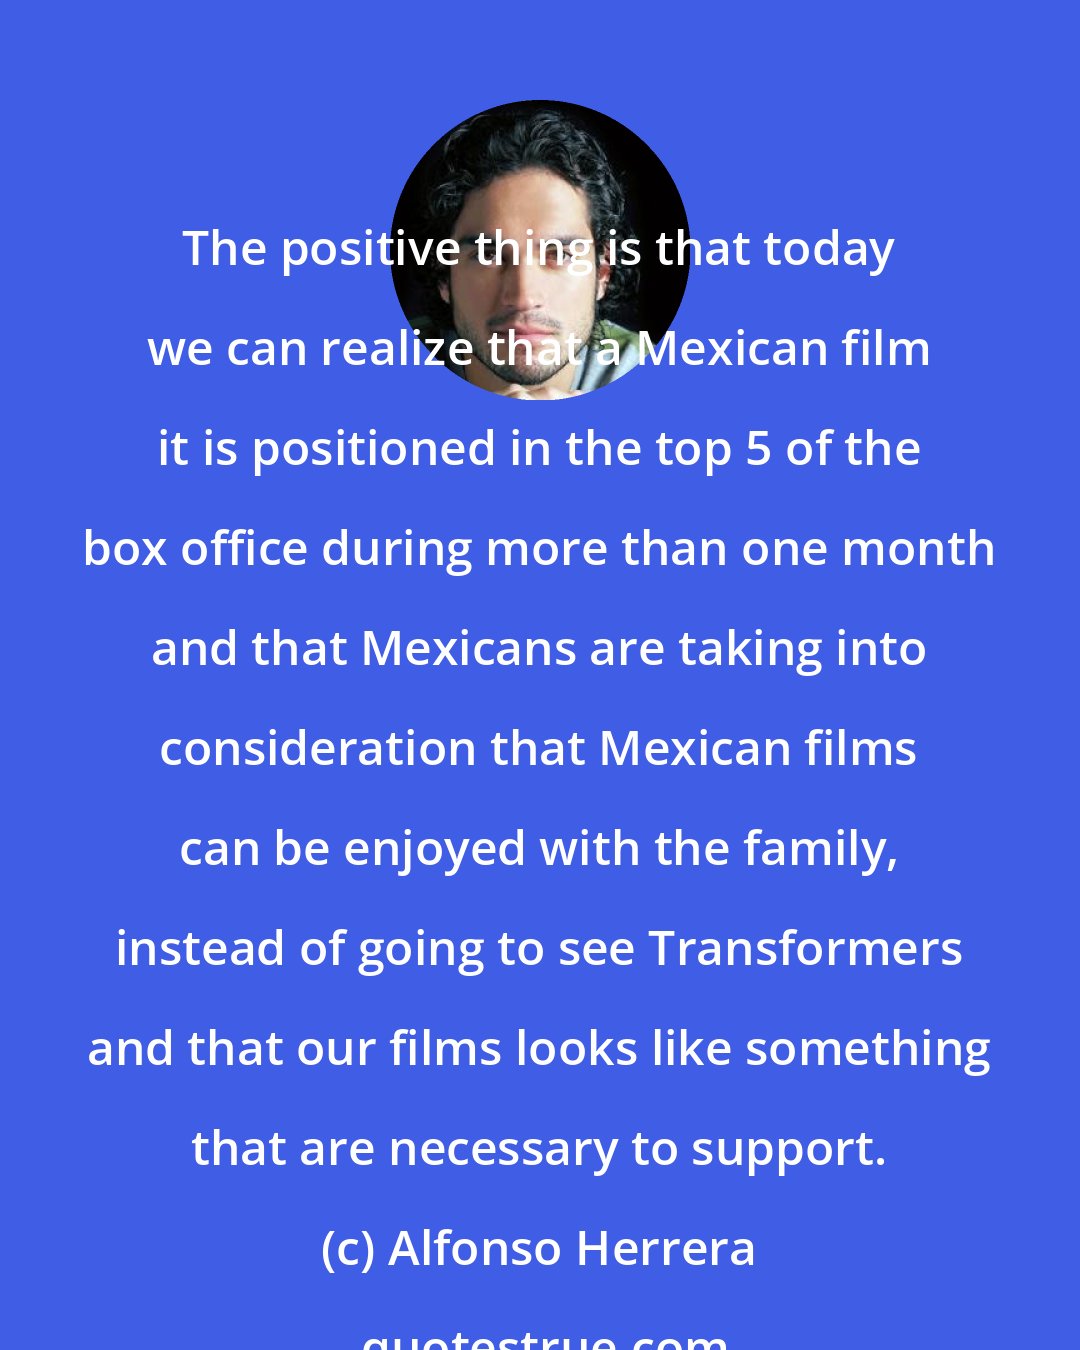 Alfonso Herrera: The positive thing is that today we can realize that a Mexican film it is positioned in the top 5 of the box office during more than one month and that Mexicans are taking into consideration that Mexican films can be enjoyed with the family, instead of going to see Transformers and that our films looks like something that are necessary to support.